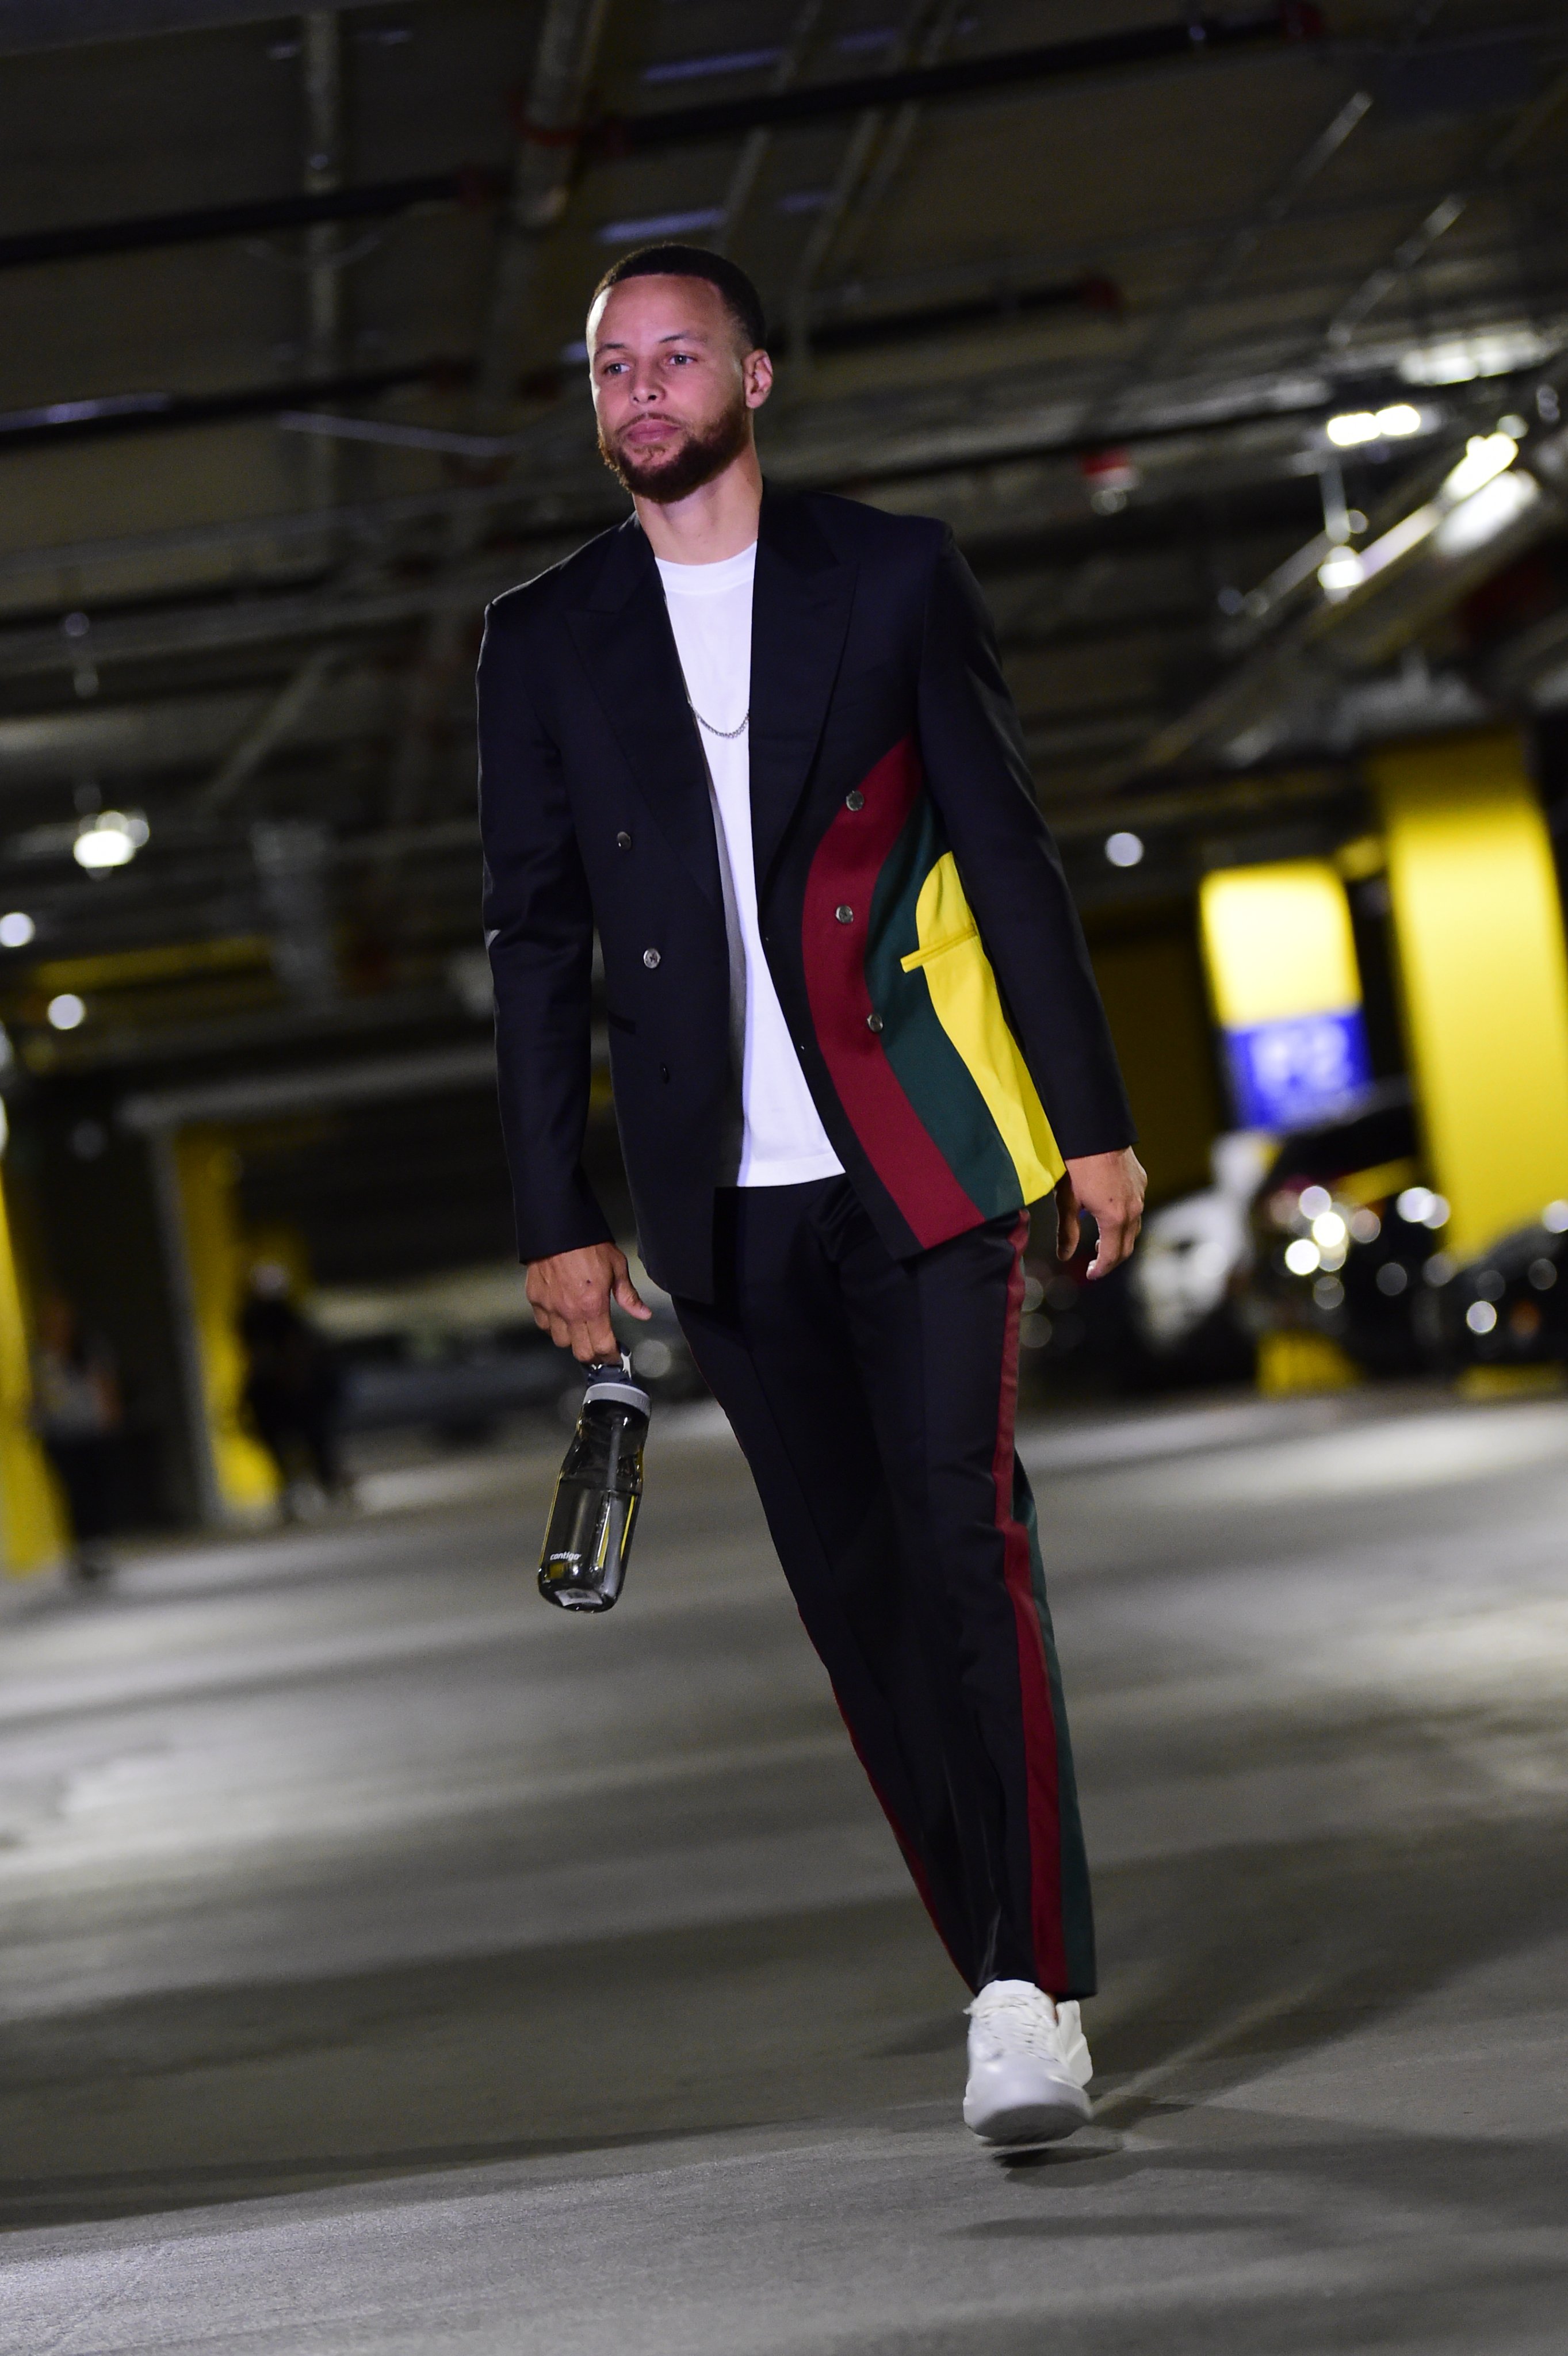 Steph Curry's Suits Up in 'Fresh' Color-Blocked Outfit for NBA